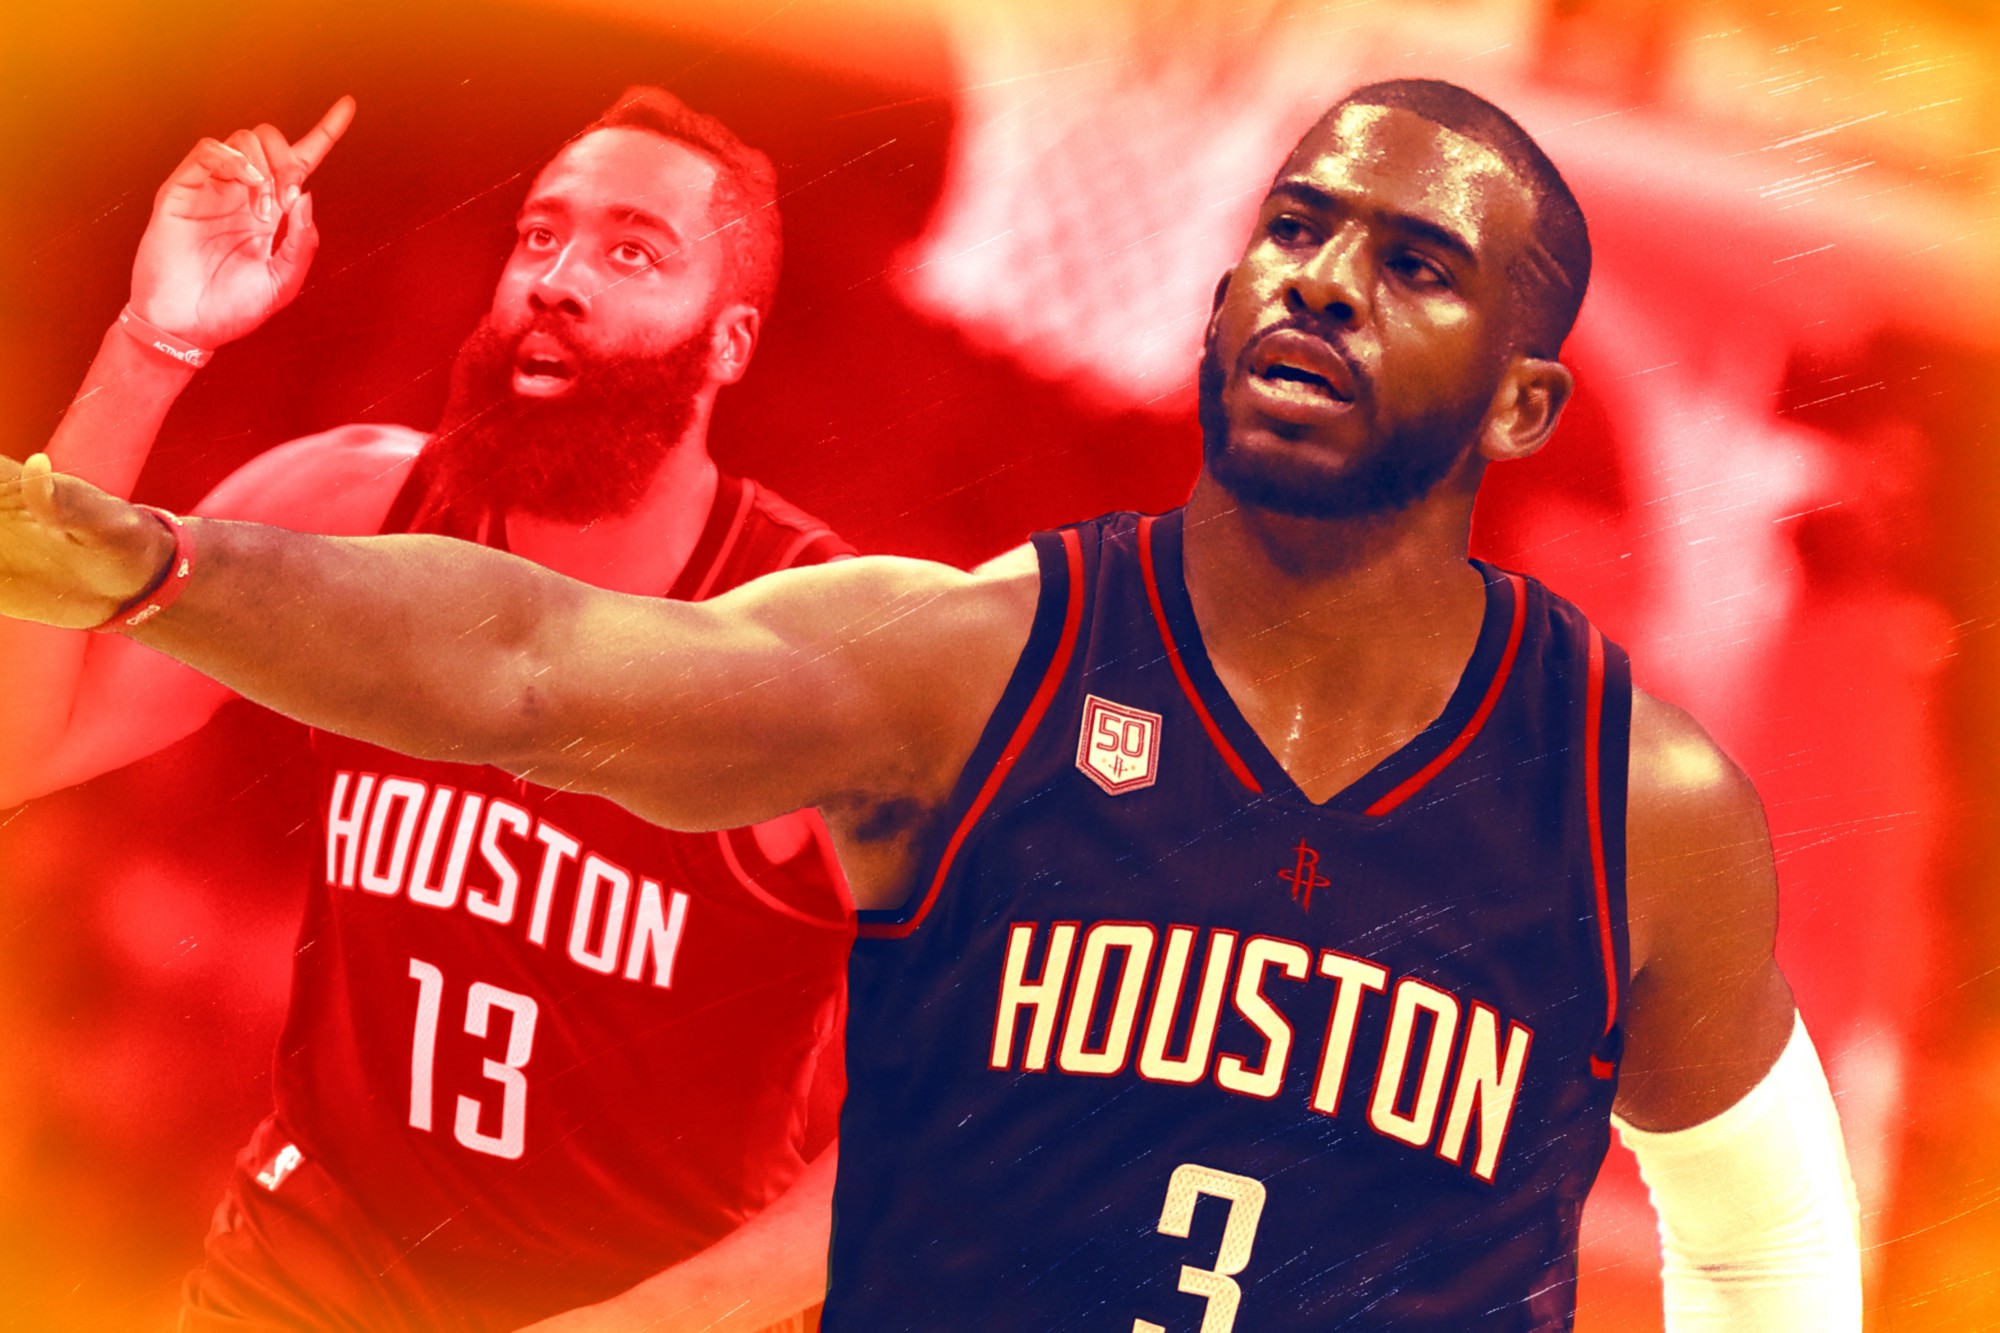 Will Chris Paul Propel The Rockets To New Heights?